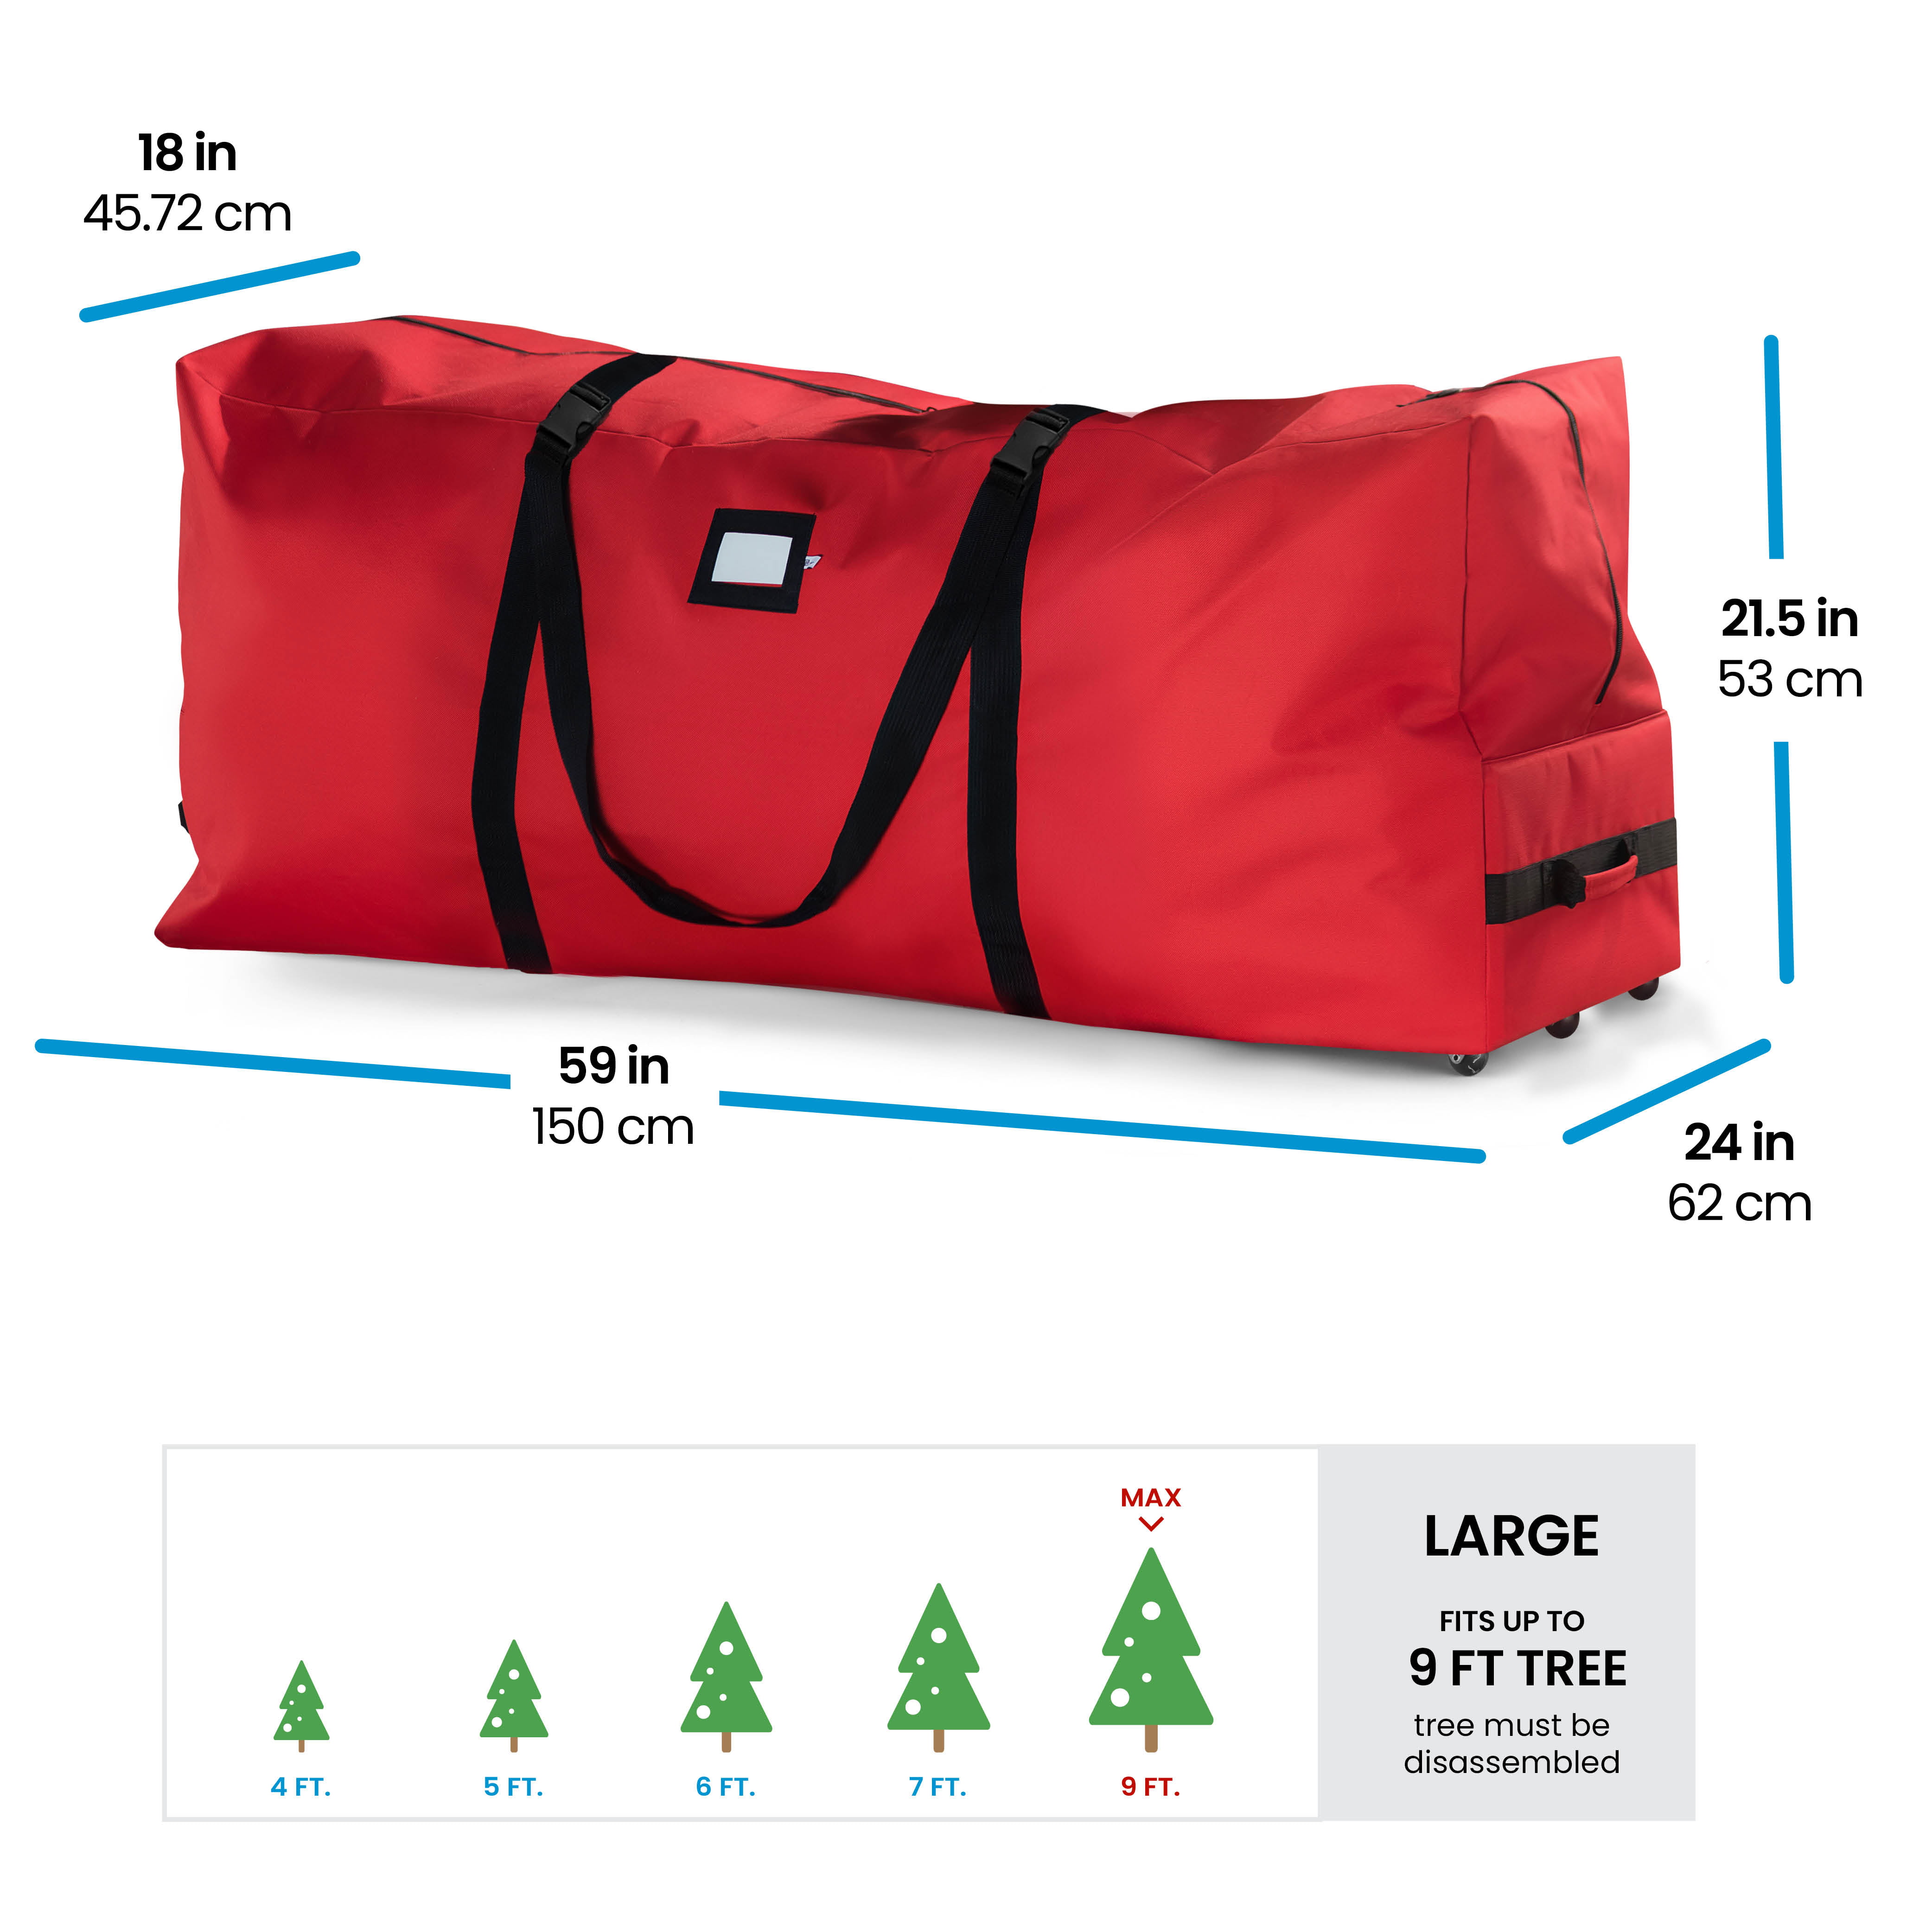 Durable Handles & Wheels for Easy Carrying and Transport Artificial Disassembled Trees Rolling Large Christmas Tree Storage Bag 5 Year Warranty Tear Proof 600D Oxford Duffle Bag Fits Upto 9 ft